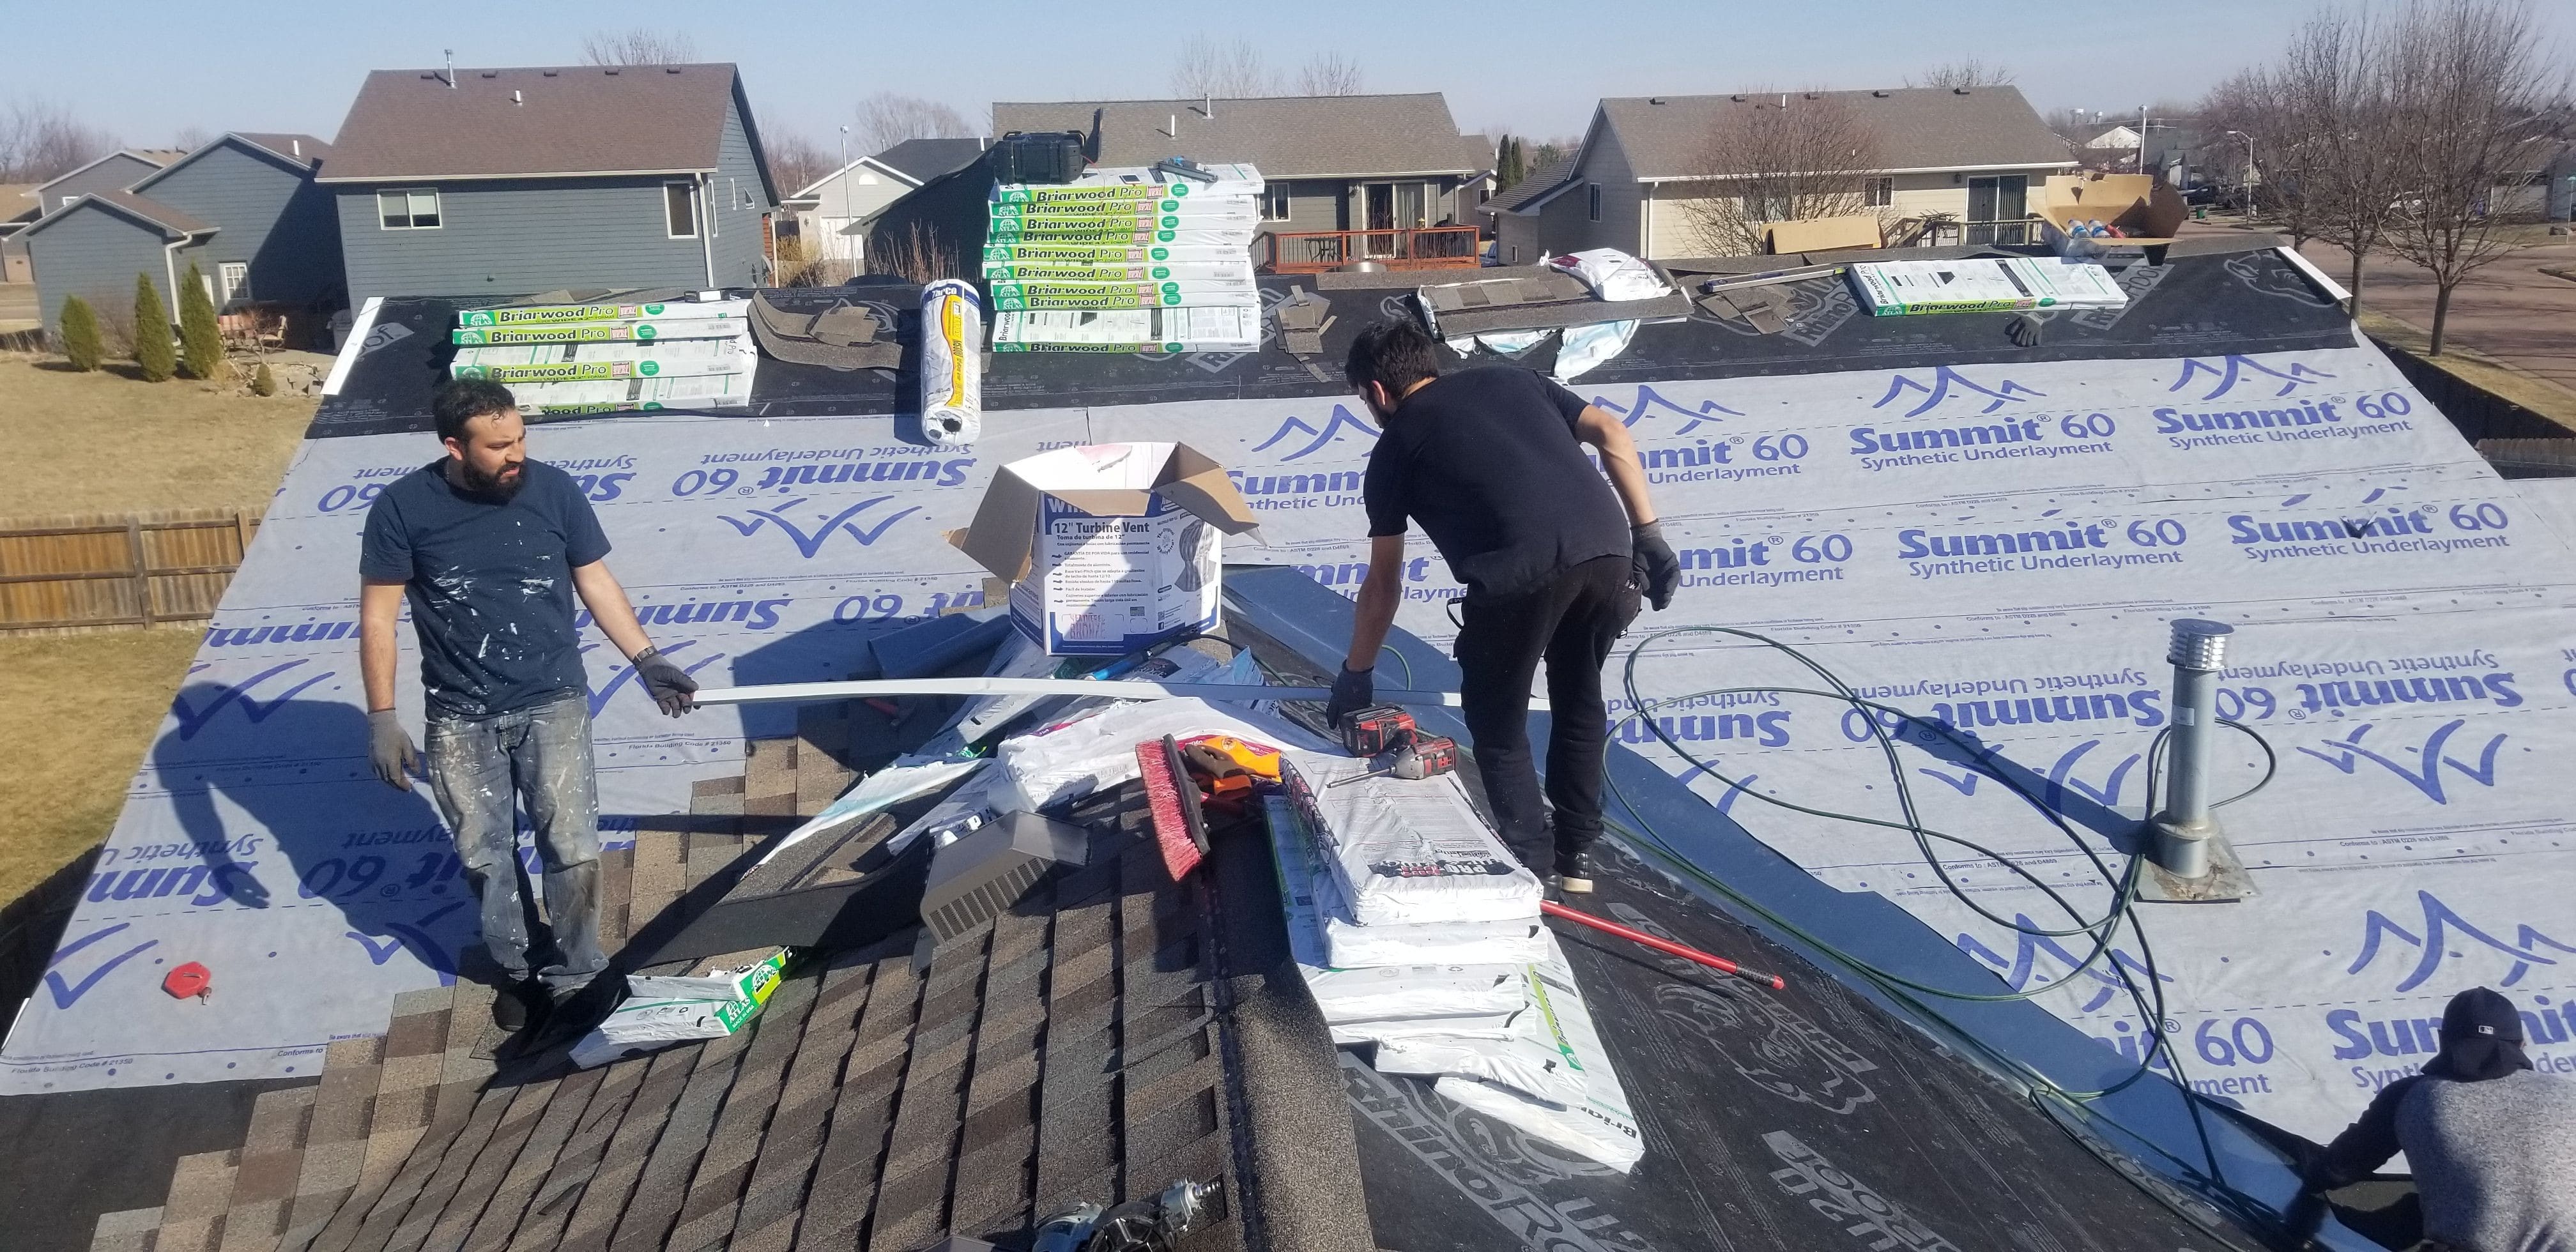 E & C Roofing And Siding